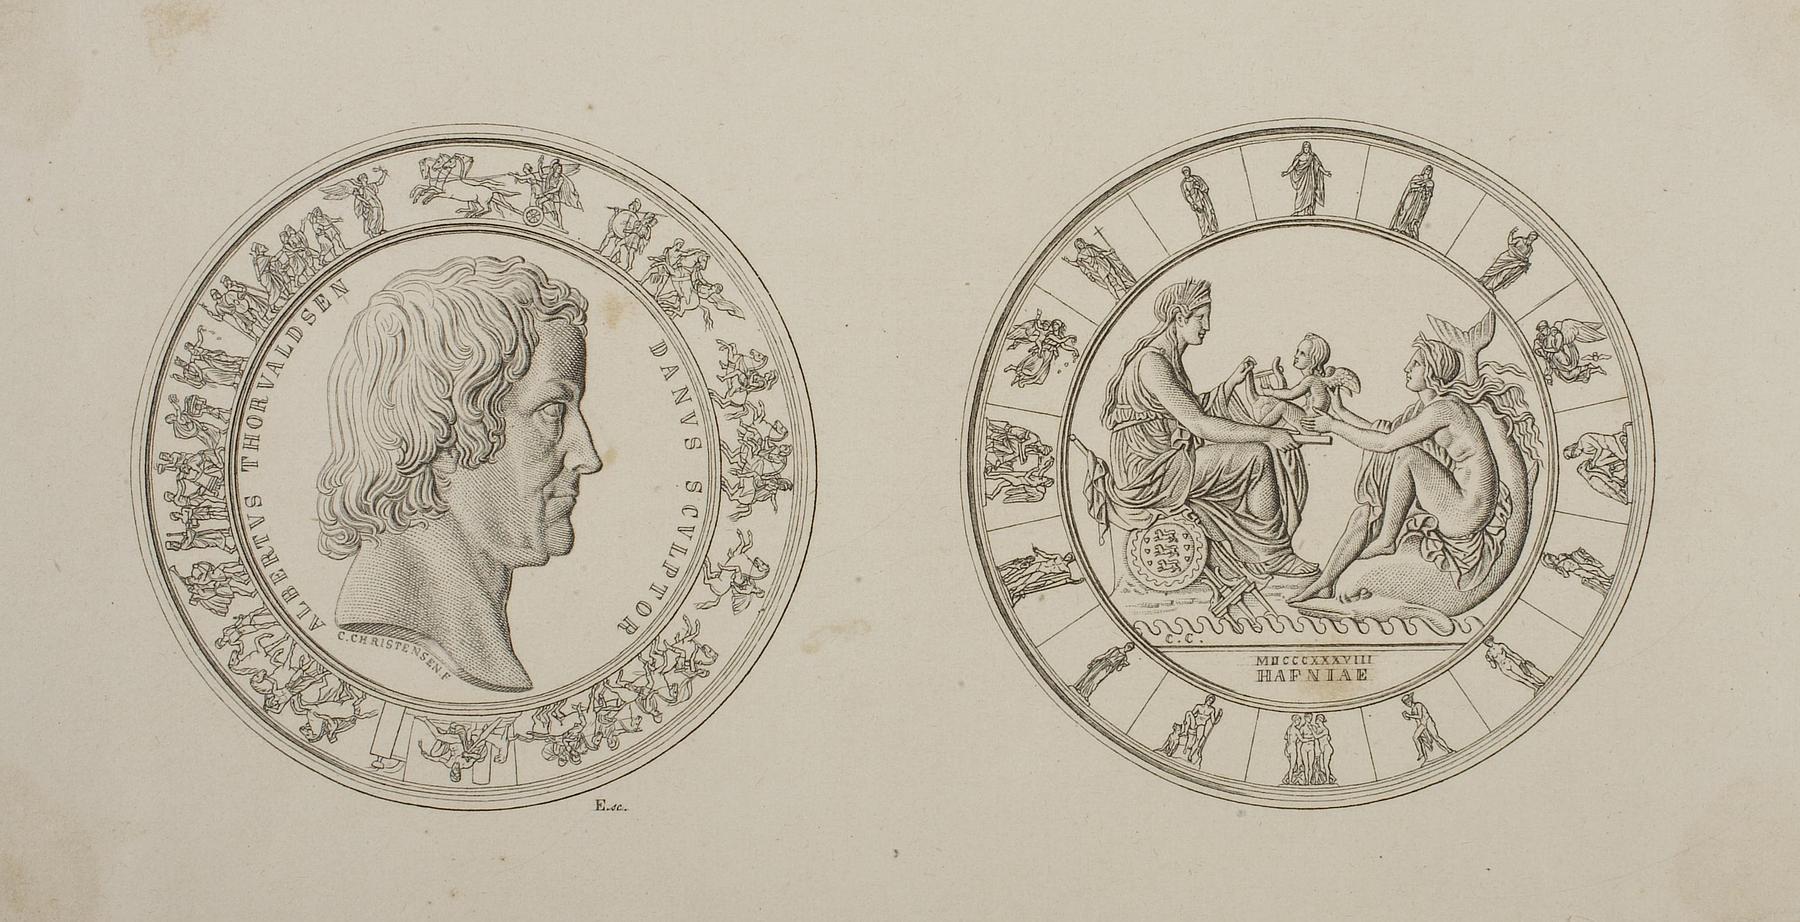 Portrait of Thorvaldsen. Denmark presented with Thorvaldsen's Cupid with the Lyre by Galathea, E2085